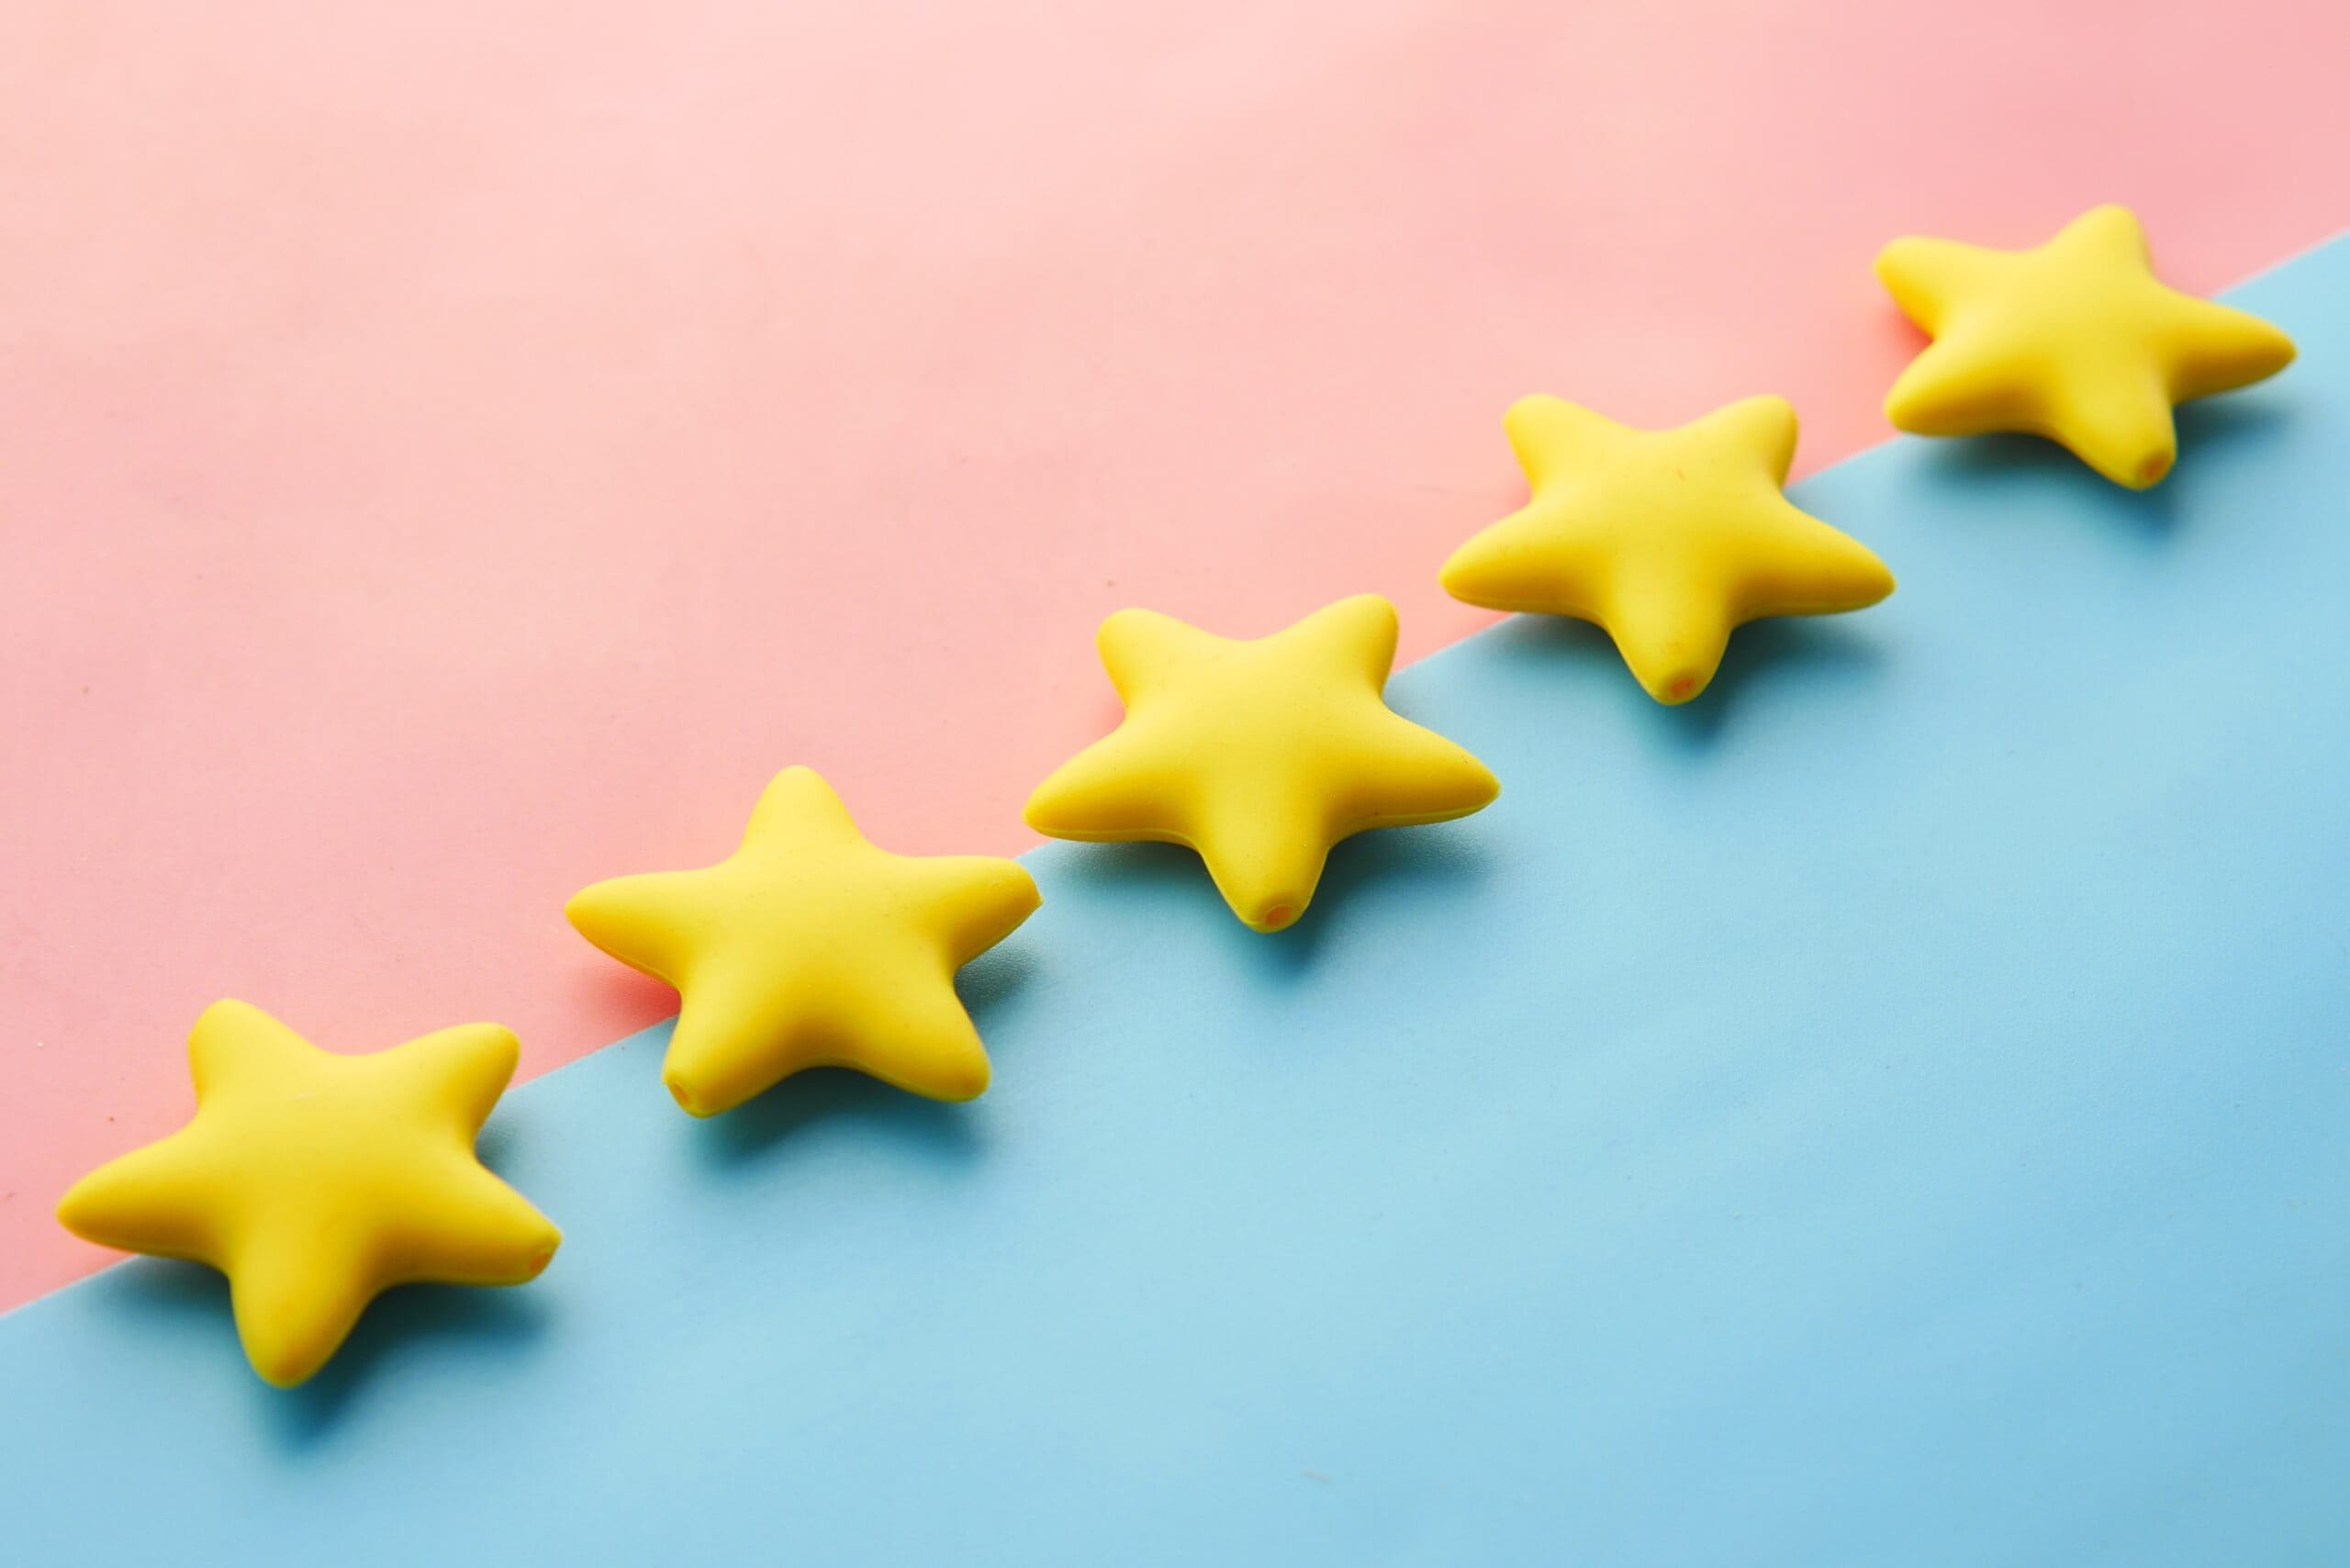 five 3d stars on a blue & pink background